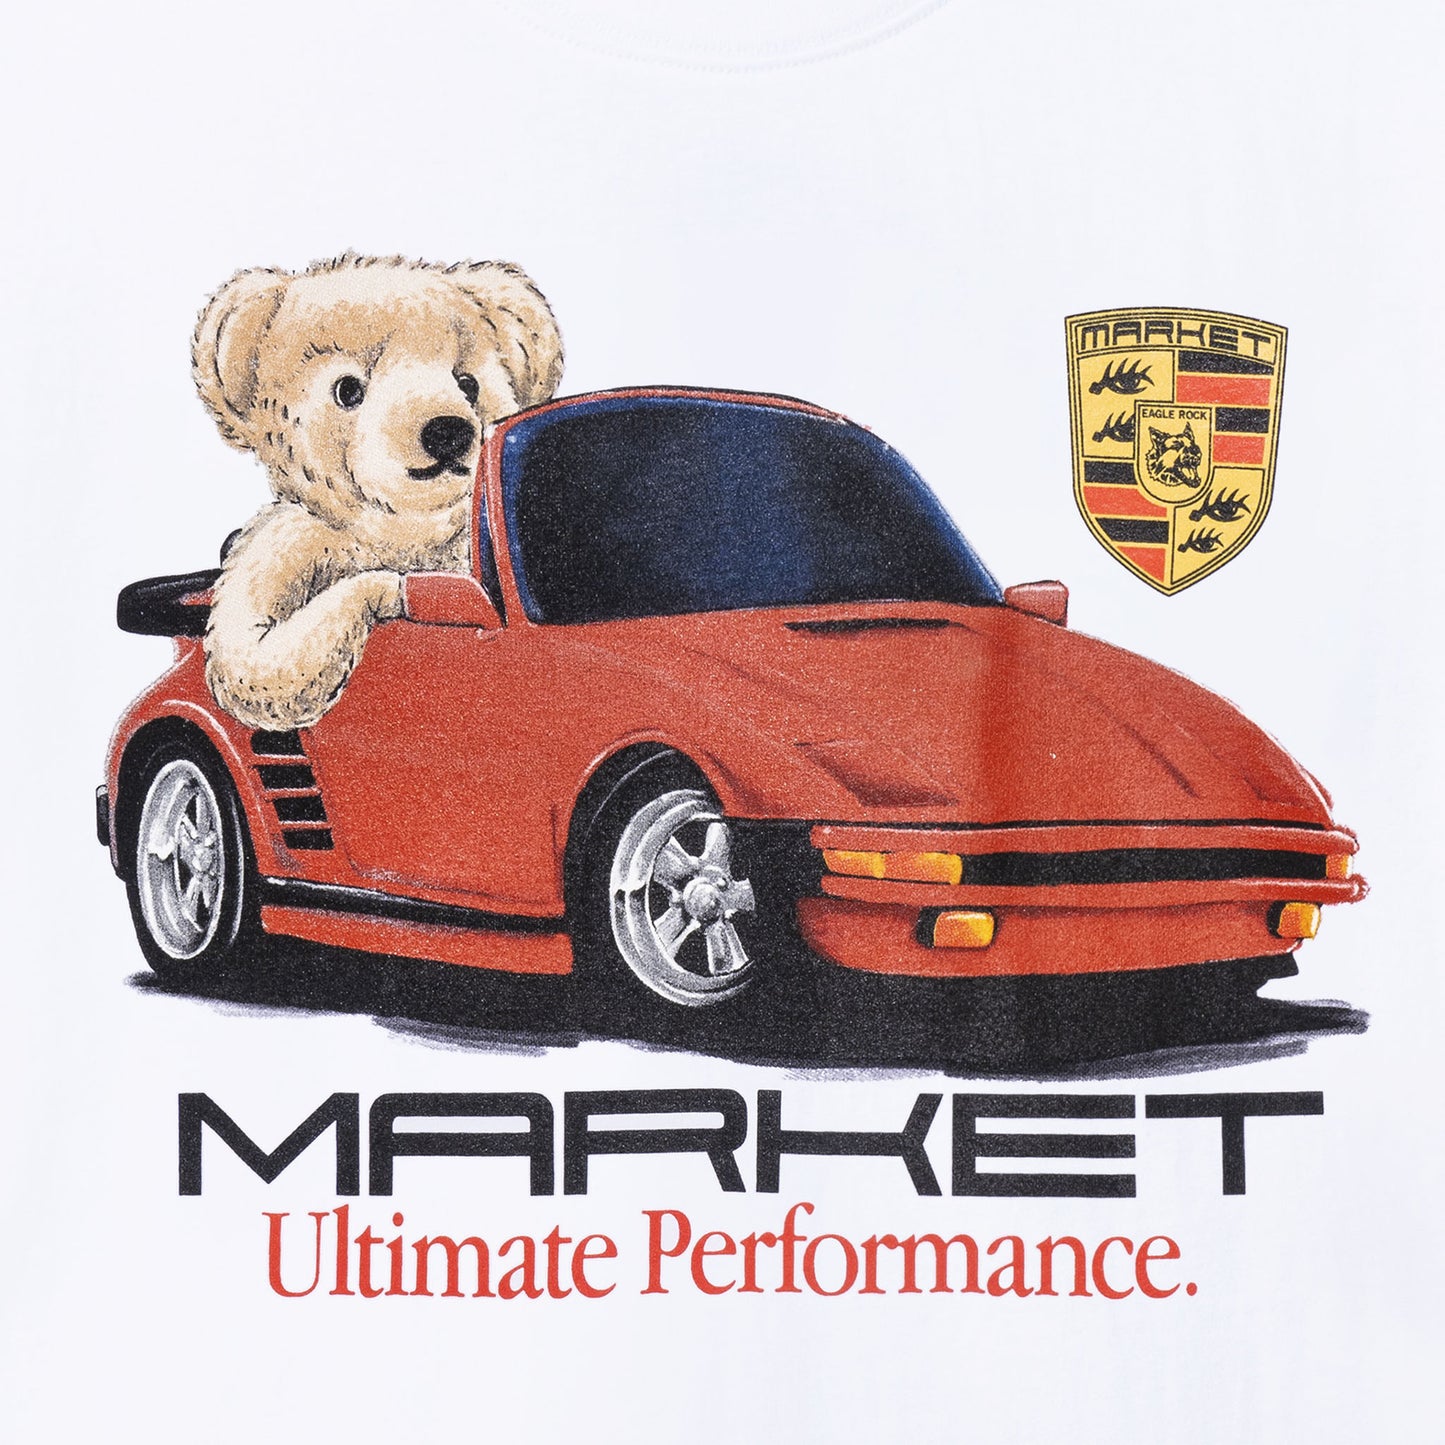 MARKET clothing brand ULTIMATE PERFORMANCE BEAR T-SHIRT. Find more graphic tees, hats, hoodies and more at MarketStudios.com. Formally Chinatown Market.